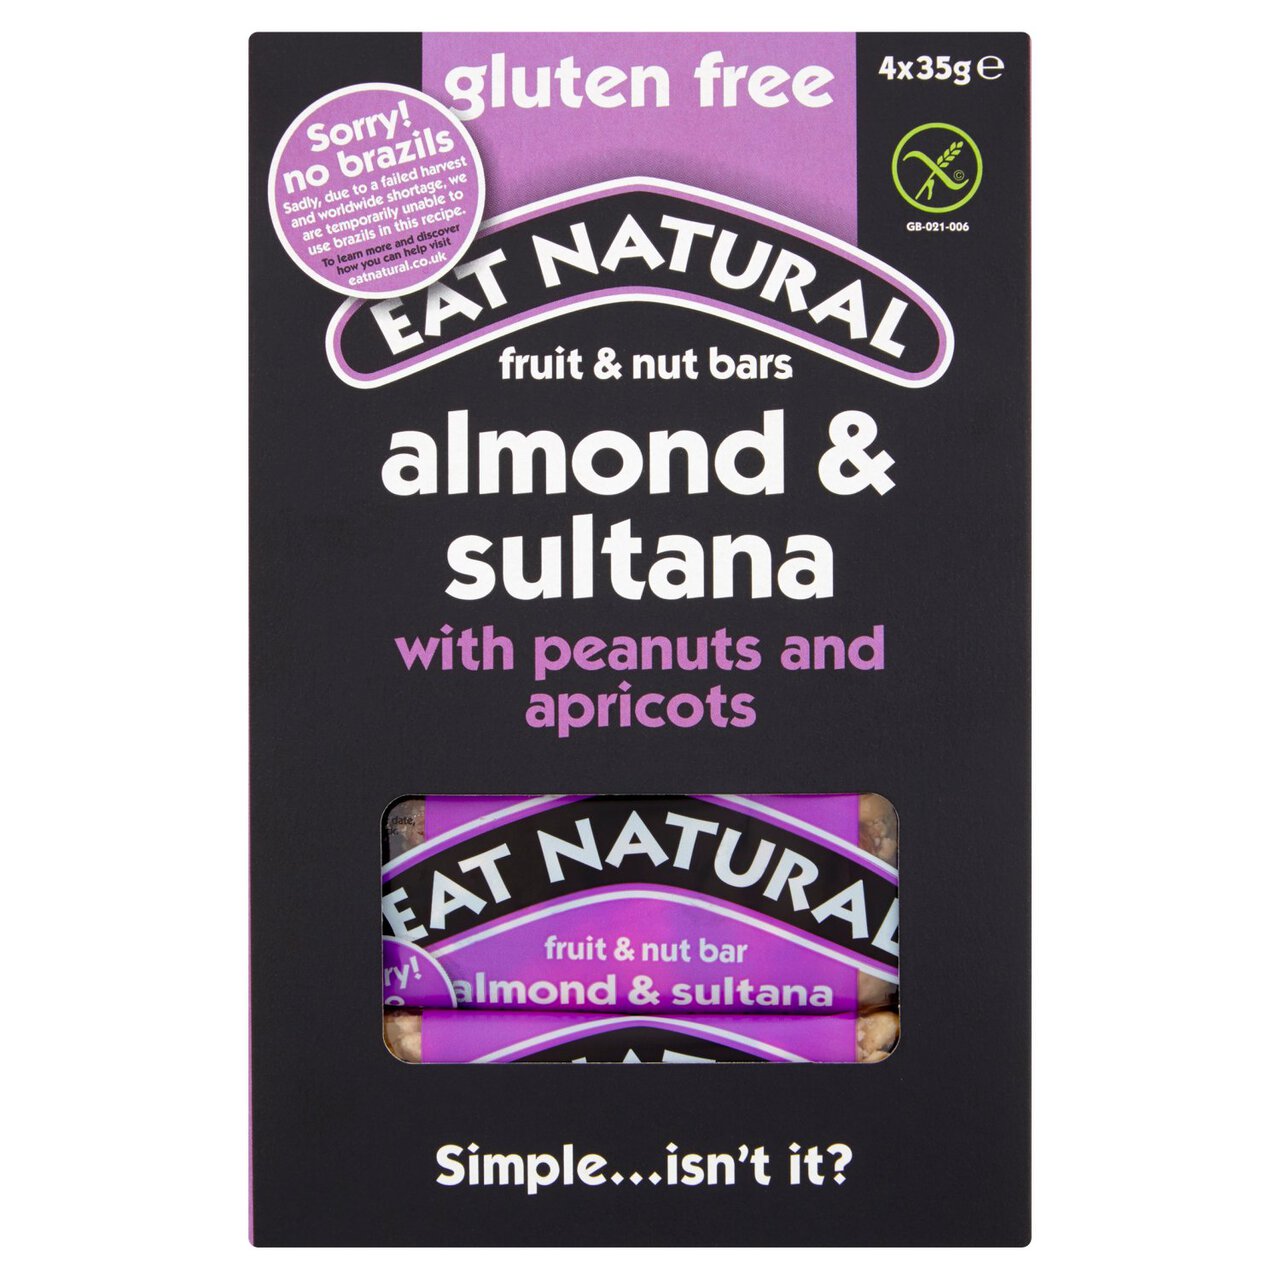 Eat Natural Almond & Sultana Bars 3 x 45g